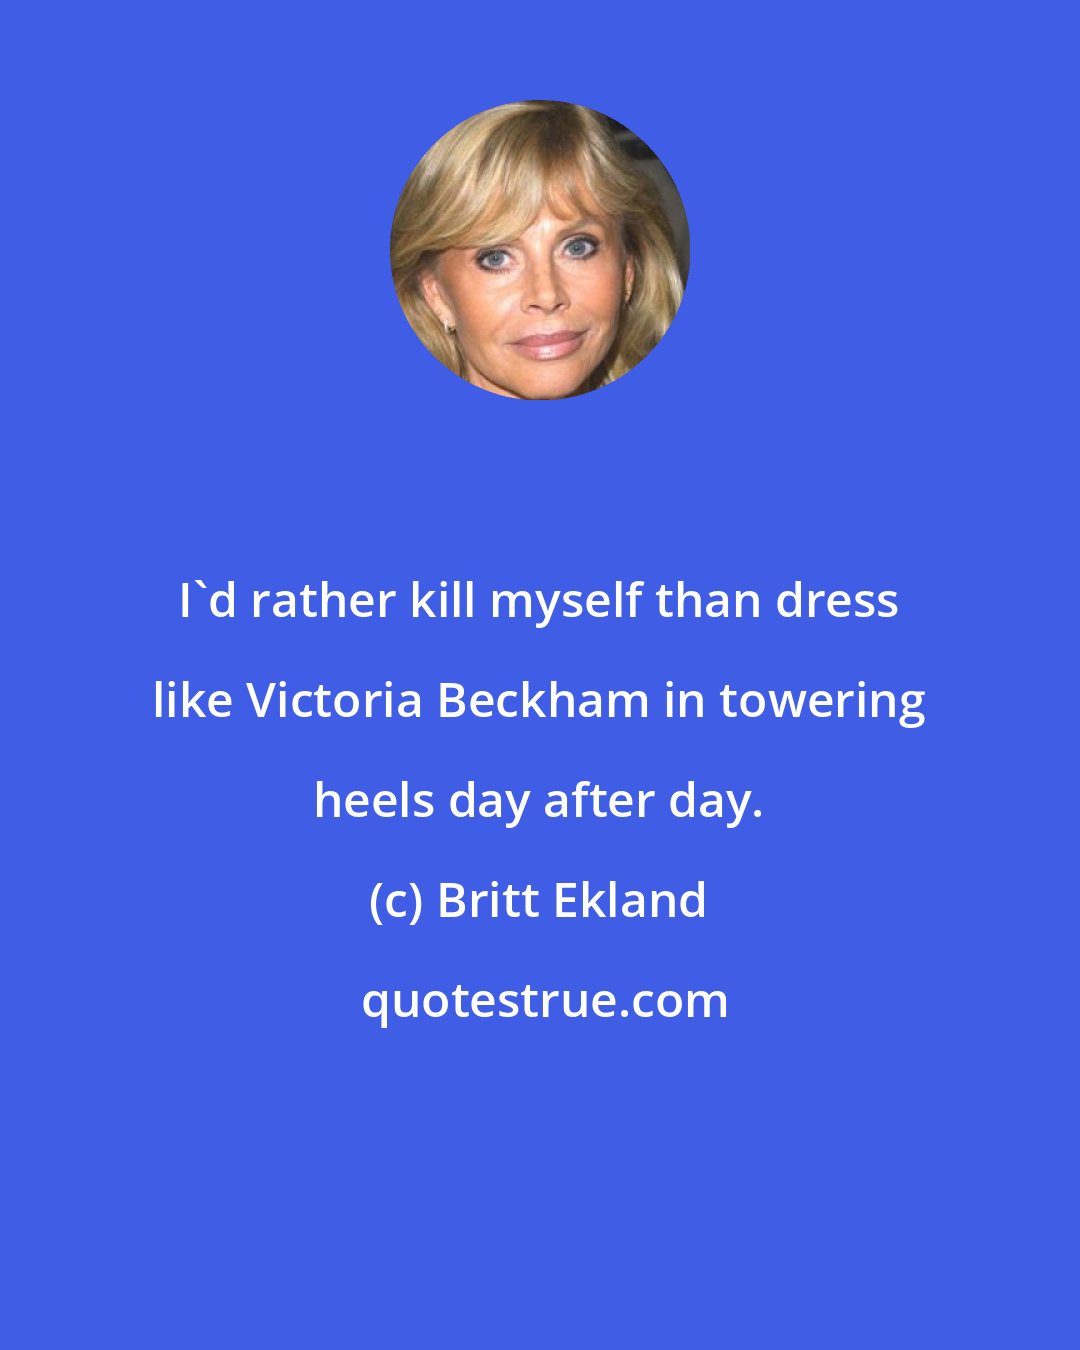 Britt Ekland: I'd rather kill myself than dress like Victoria Beckham in towering heels day after day.